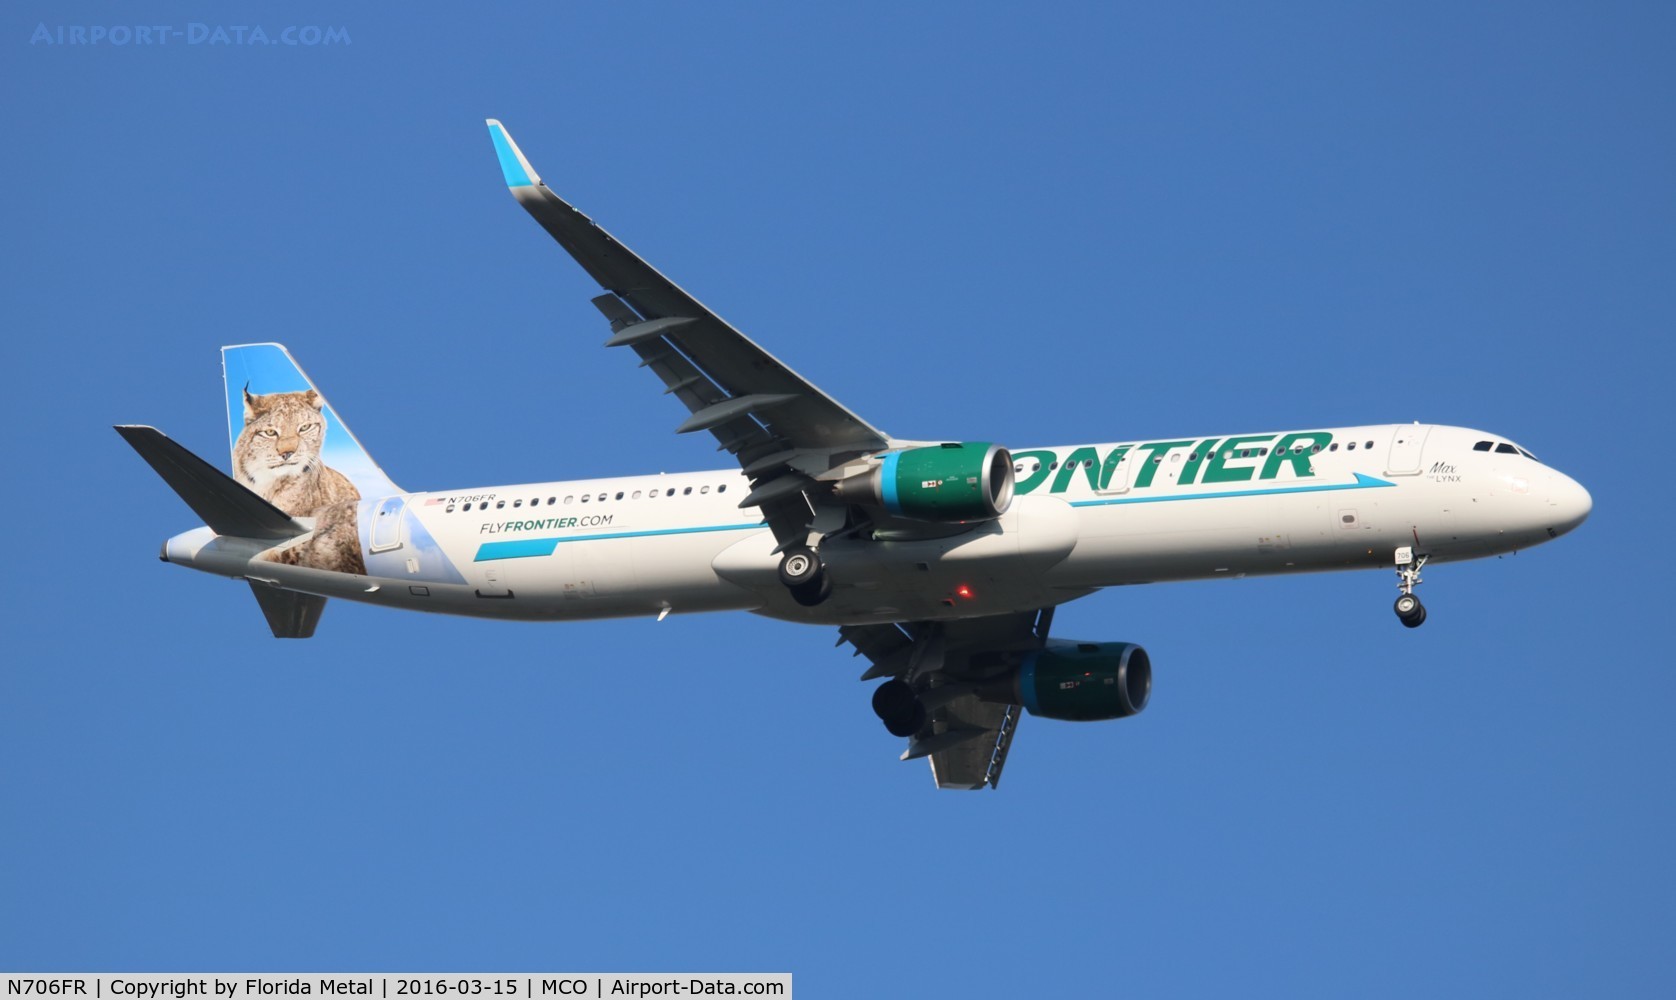 N706FR, 2015 Airbus A321-211 C/N 6926, Frontier Max the Lynx